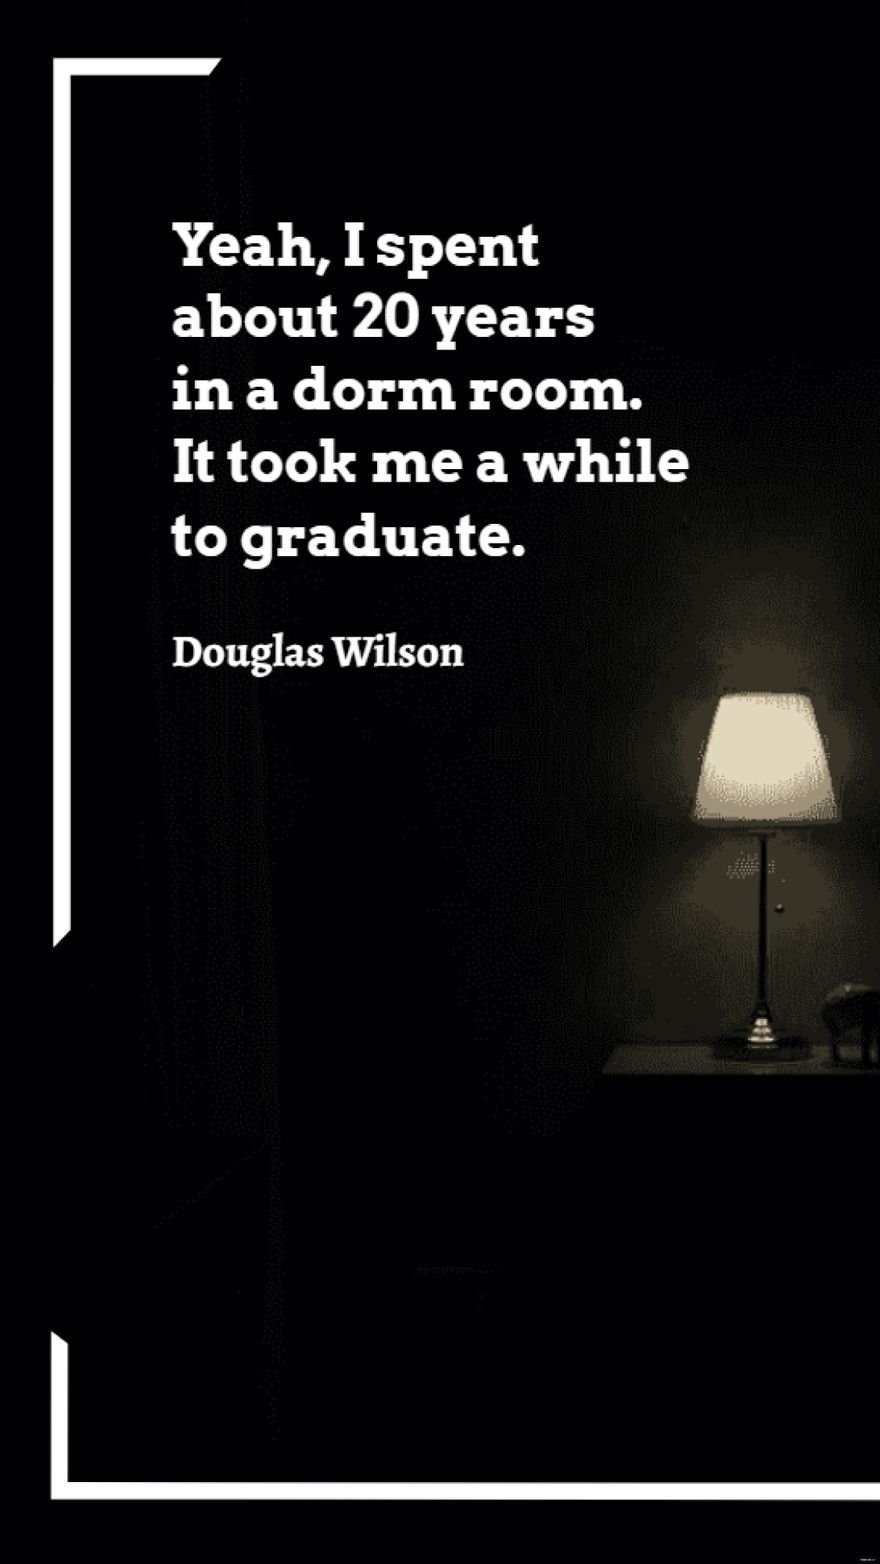 Free Douglas Wilson - Yeah, I spent about 20 years in a dorm room. It took me a while to graduate. in JPG